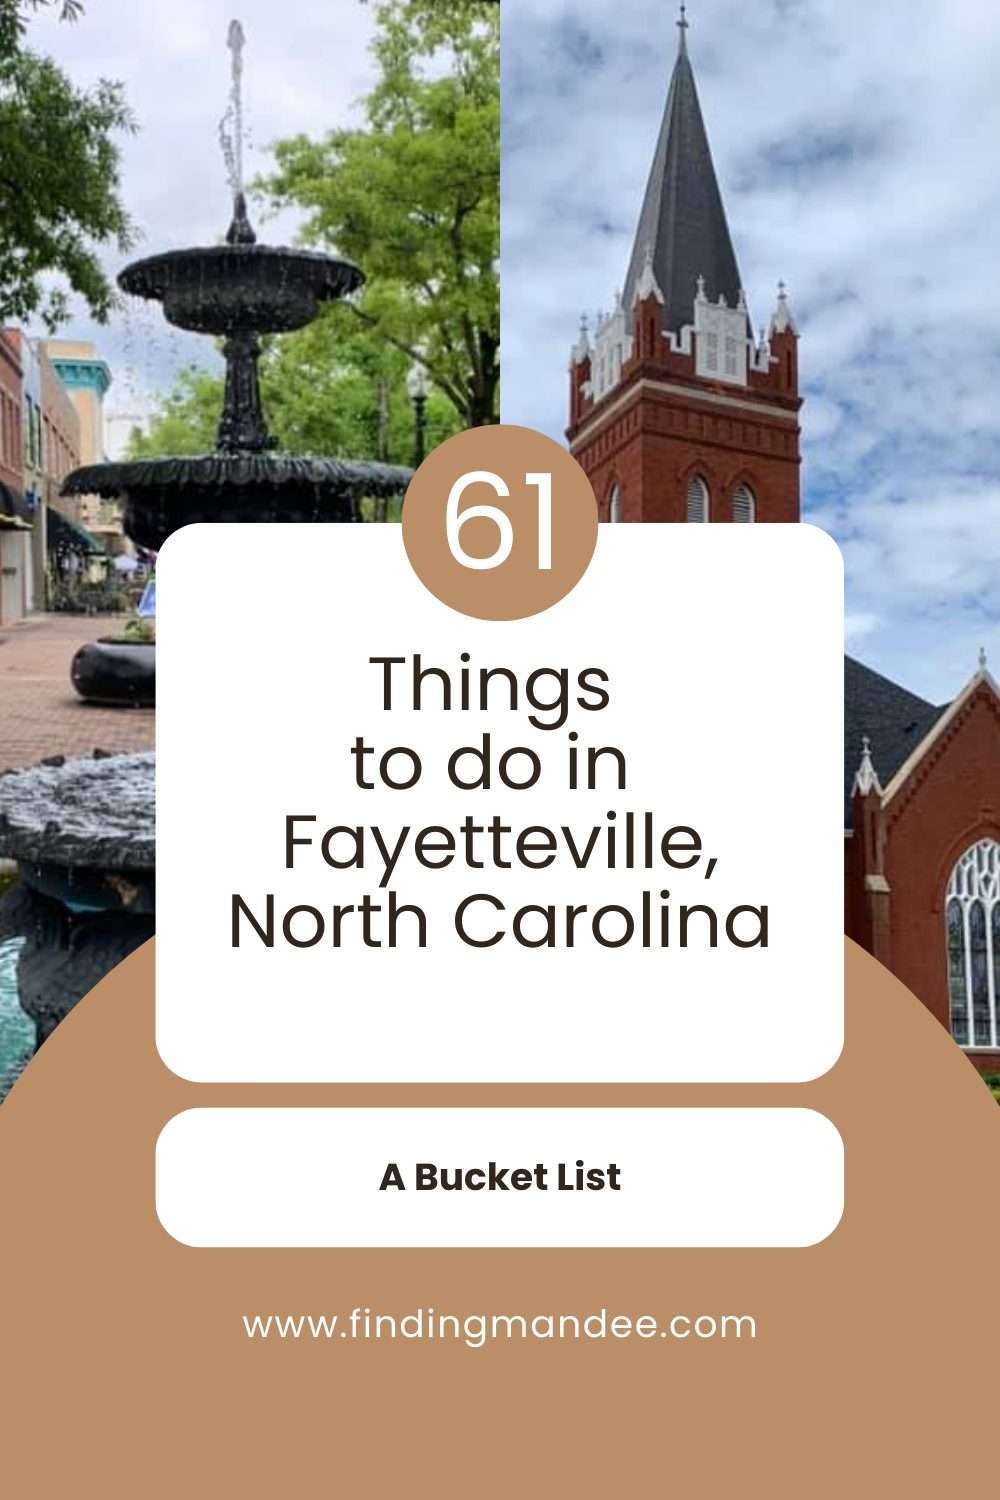 61 Things to do in Fayetteville, NC | Finding Mandee